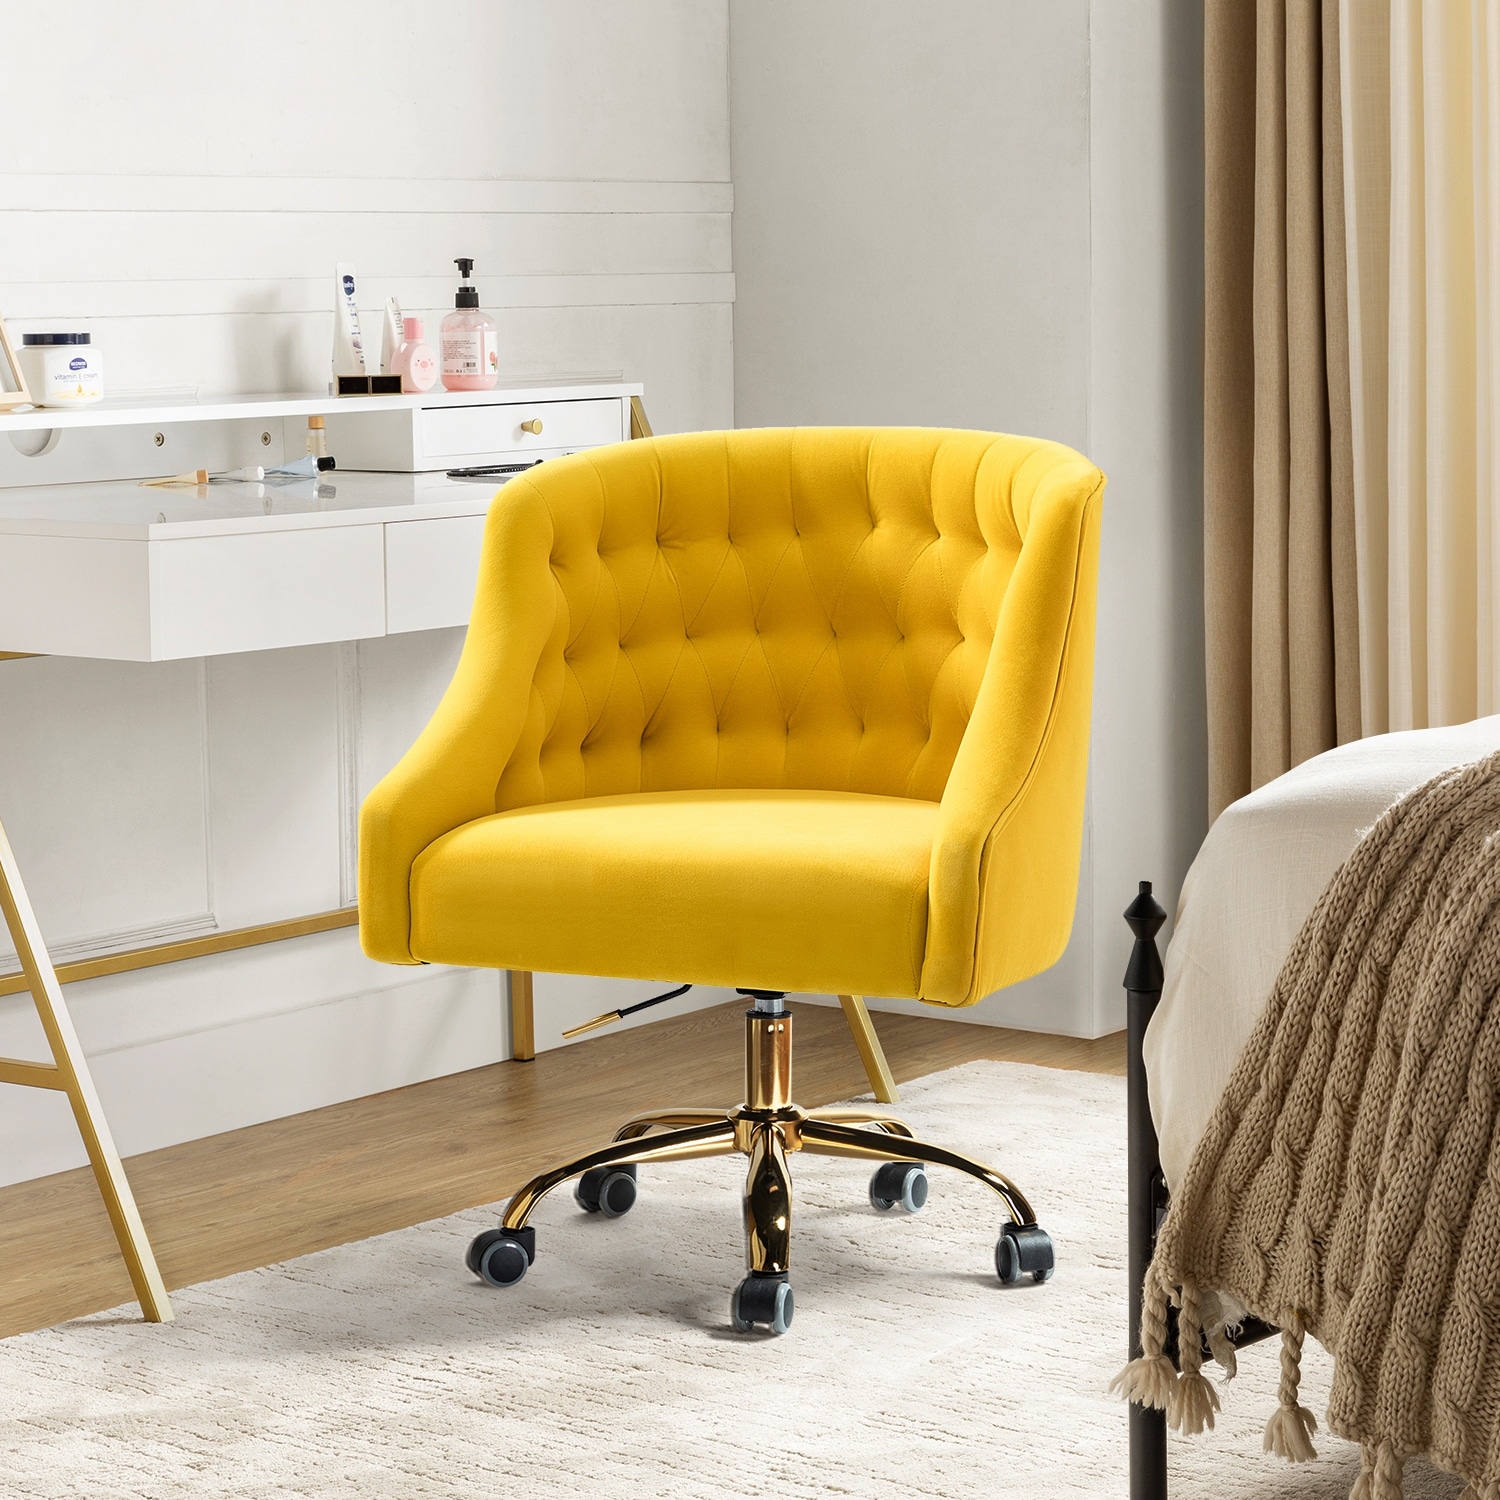 https://ak1.ostkcdn.com/images/products/is/images/direct/42dce081bd3c286cd61446801f991b1366f0f928/Modern-Velvet-Tufted-Office-Chair-with-Gold-Metal-Base-by-HULALA-HOME.jpg